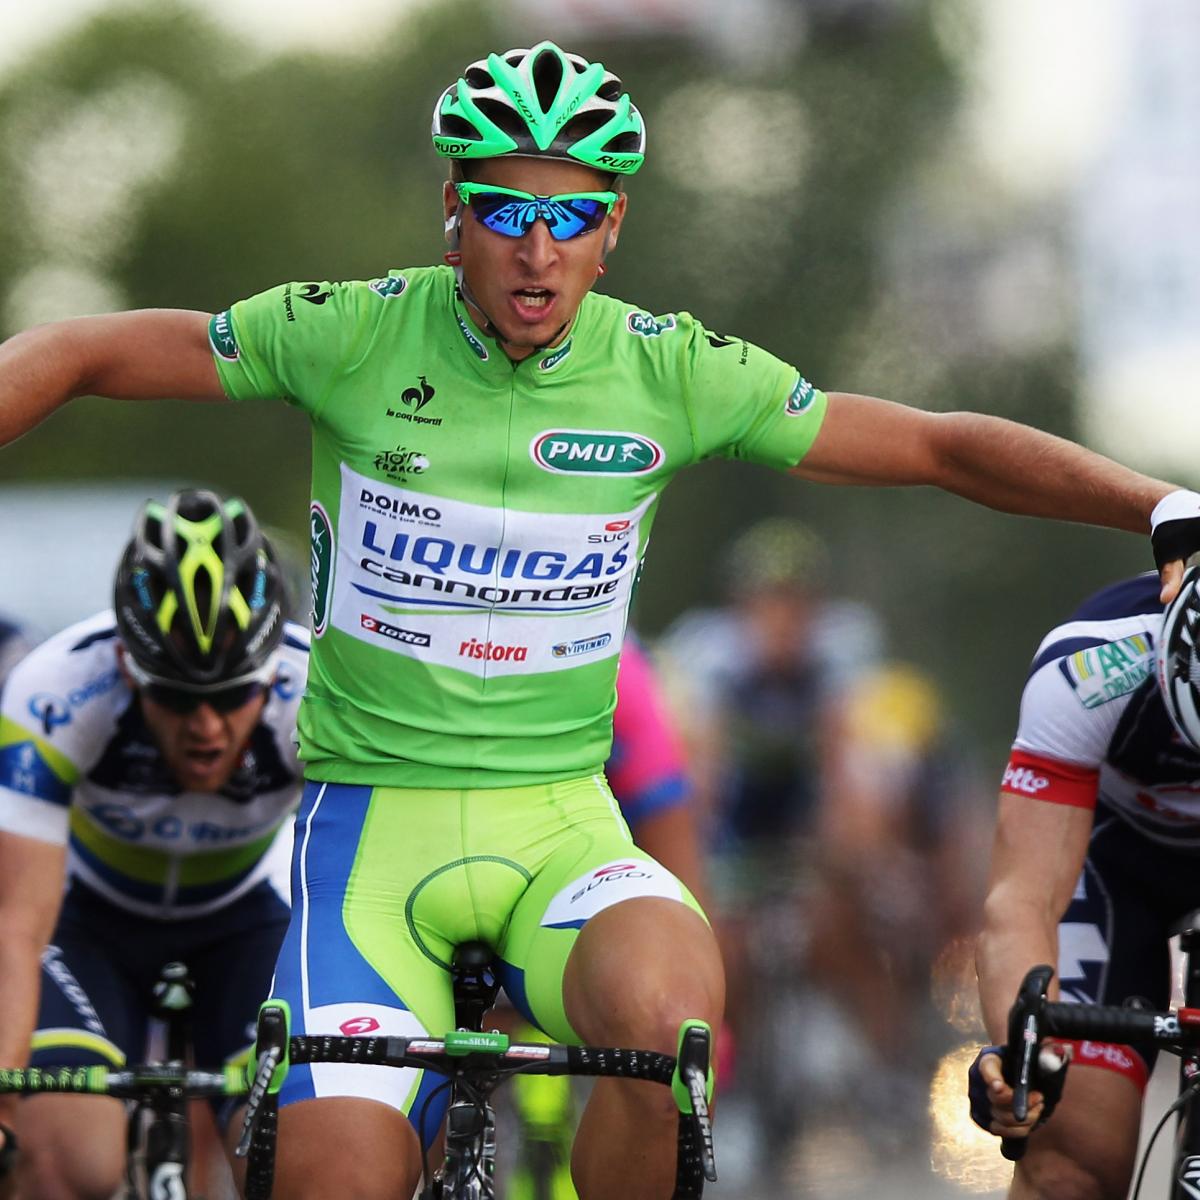 Tour De France 2012 Stage 6 Results: Winner, Leaderboard and Highlights ...